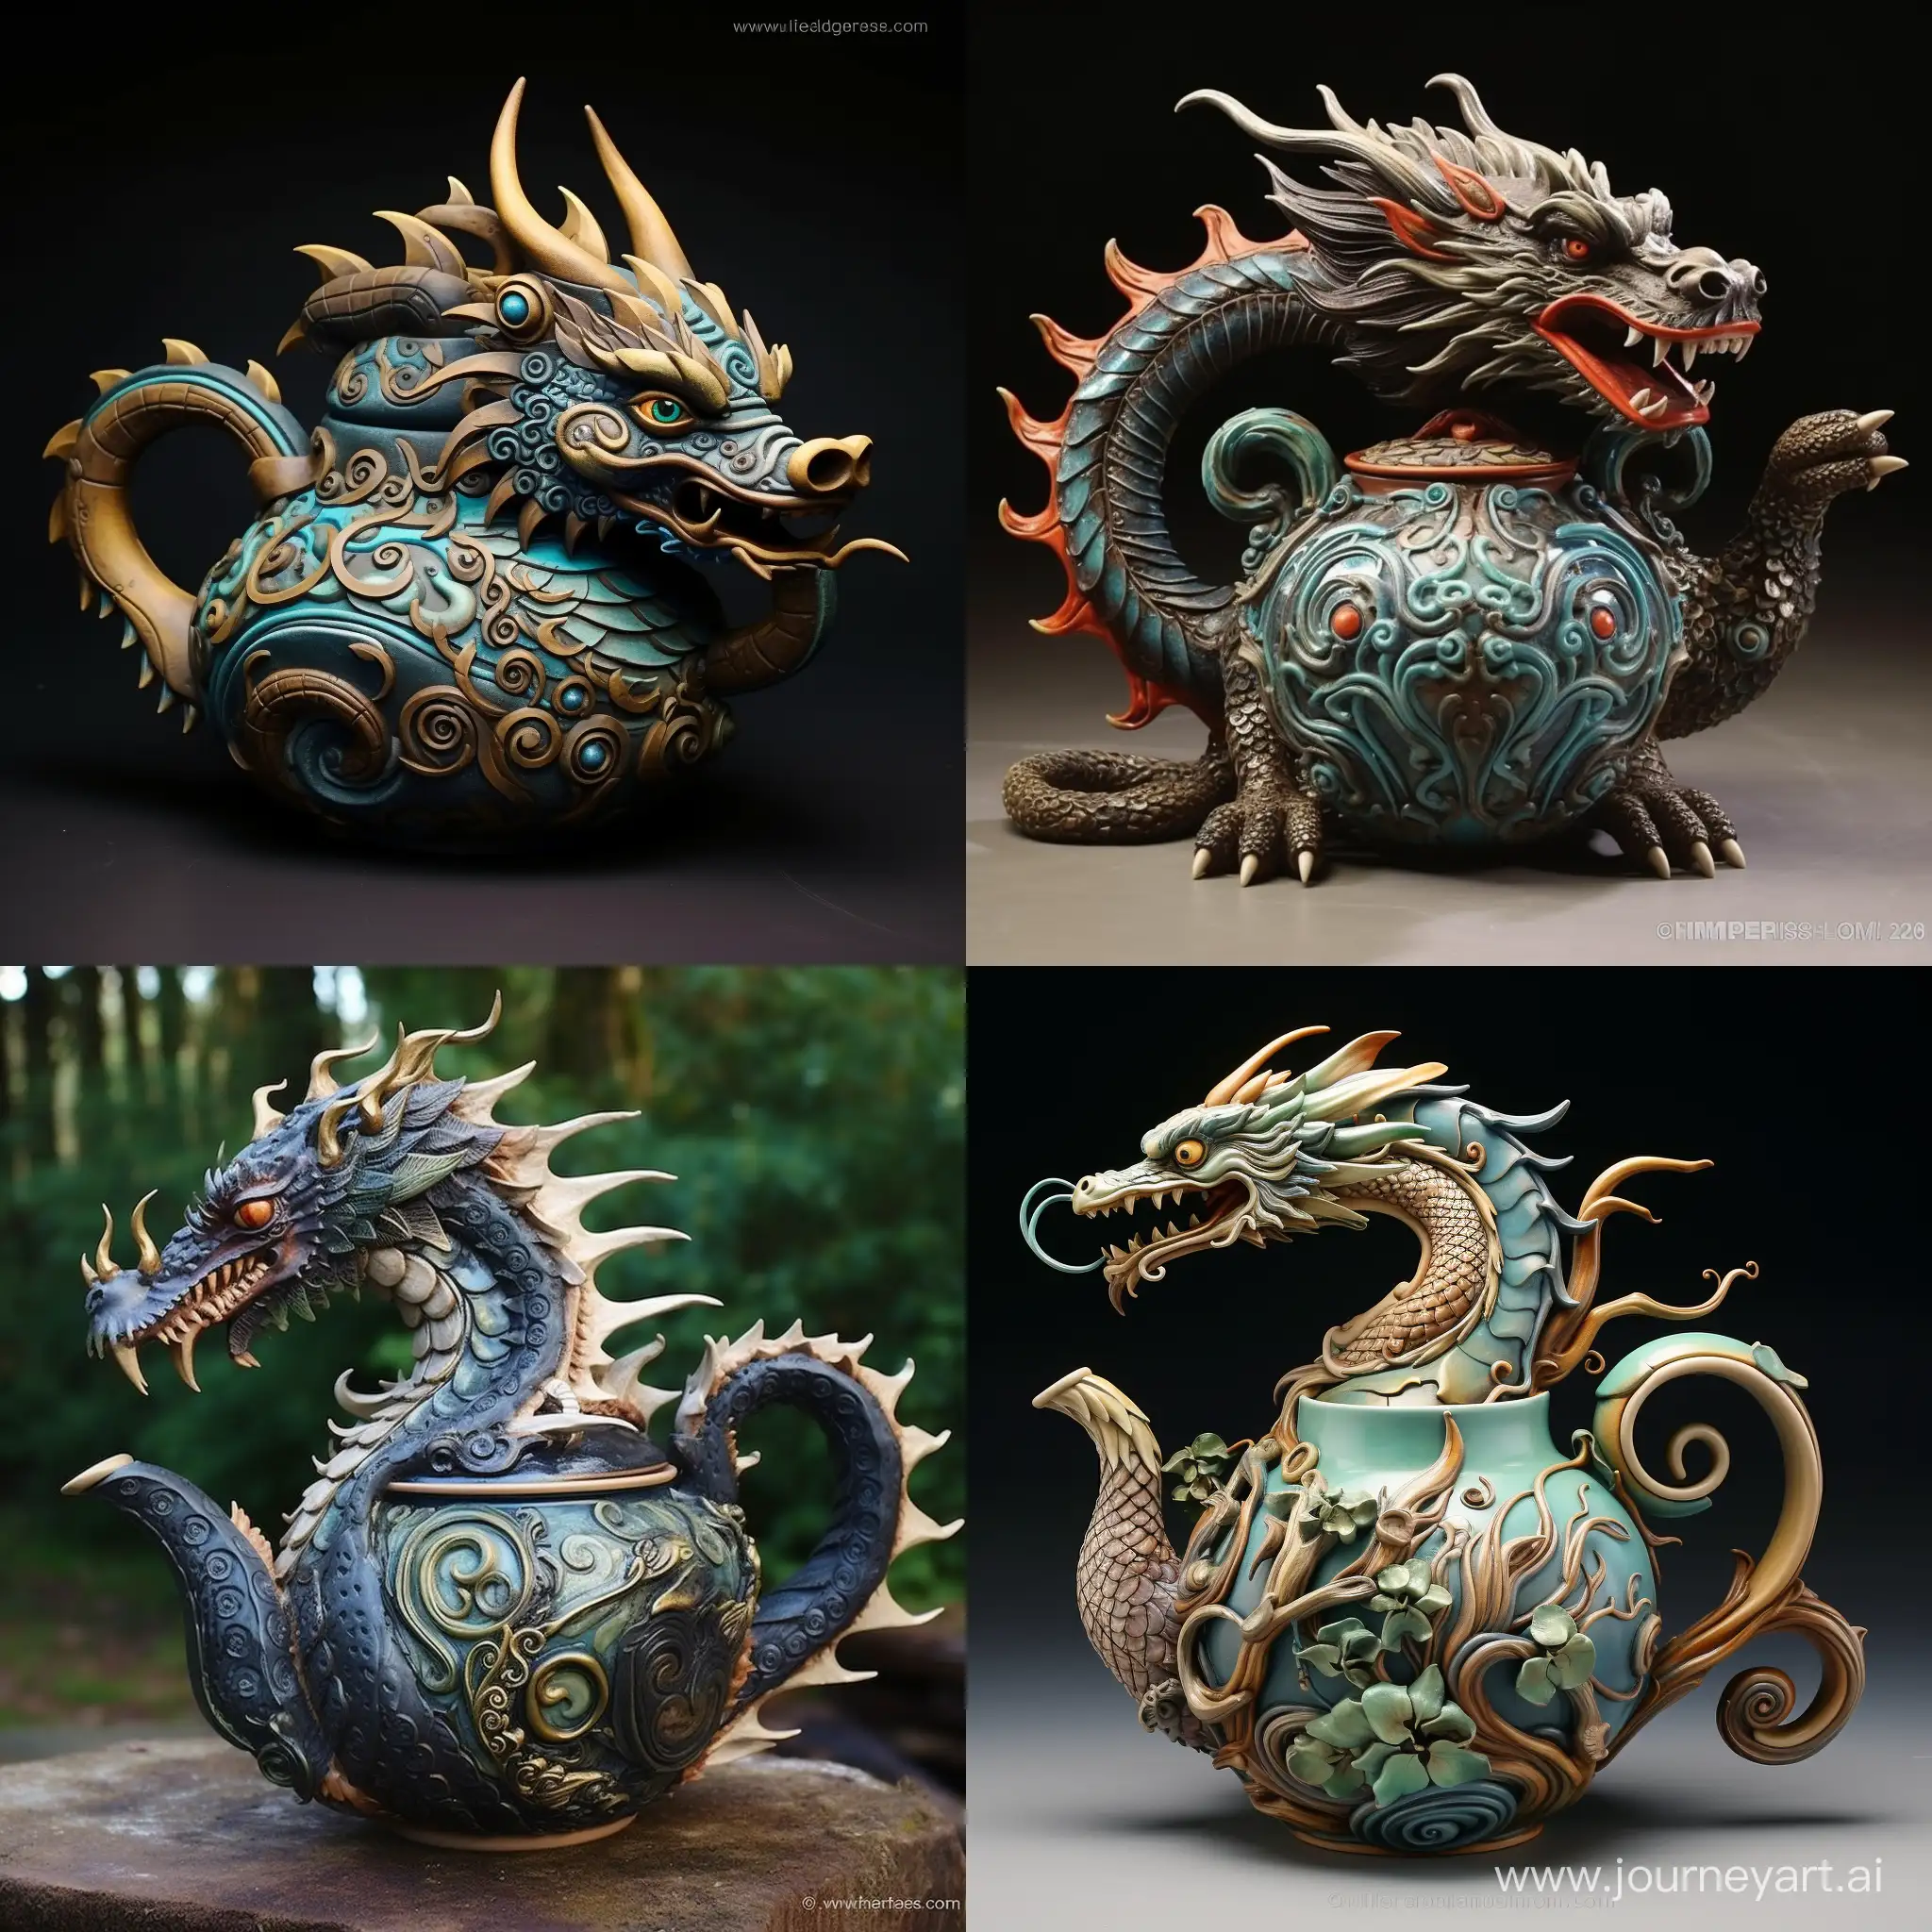 Dragon-Teapot-Ceramic-Art-Mystical-Creature-in-Detailed-Pottery-Form